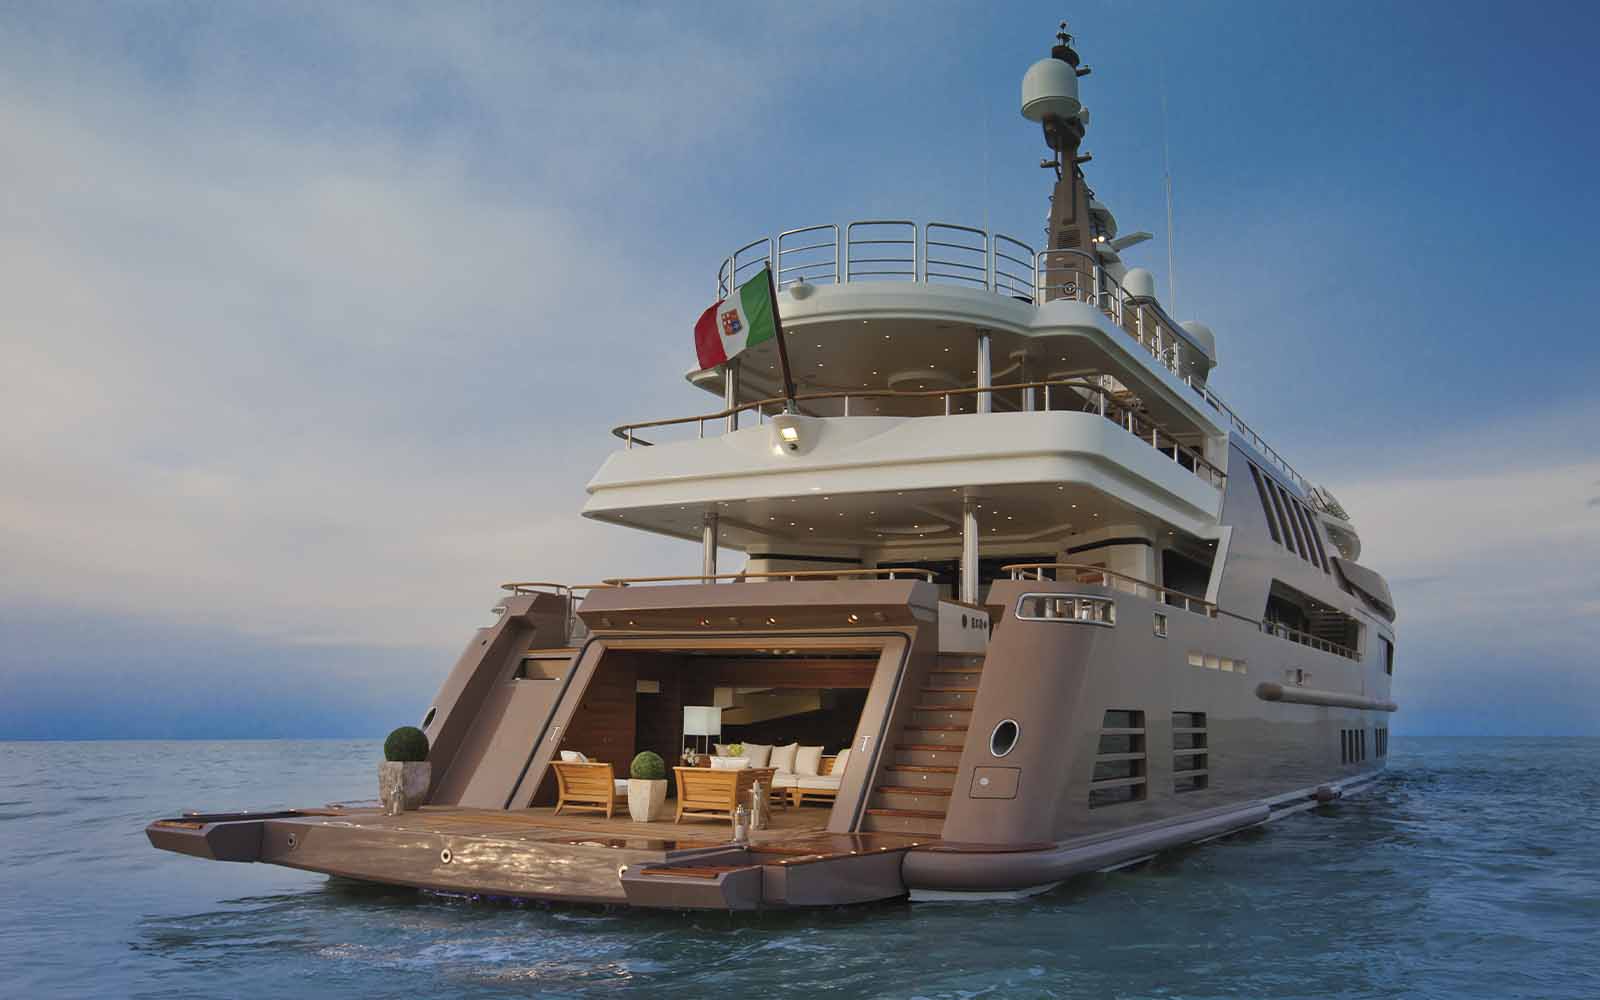 superiate j'ade crn yacht - boat shopping